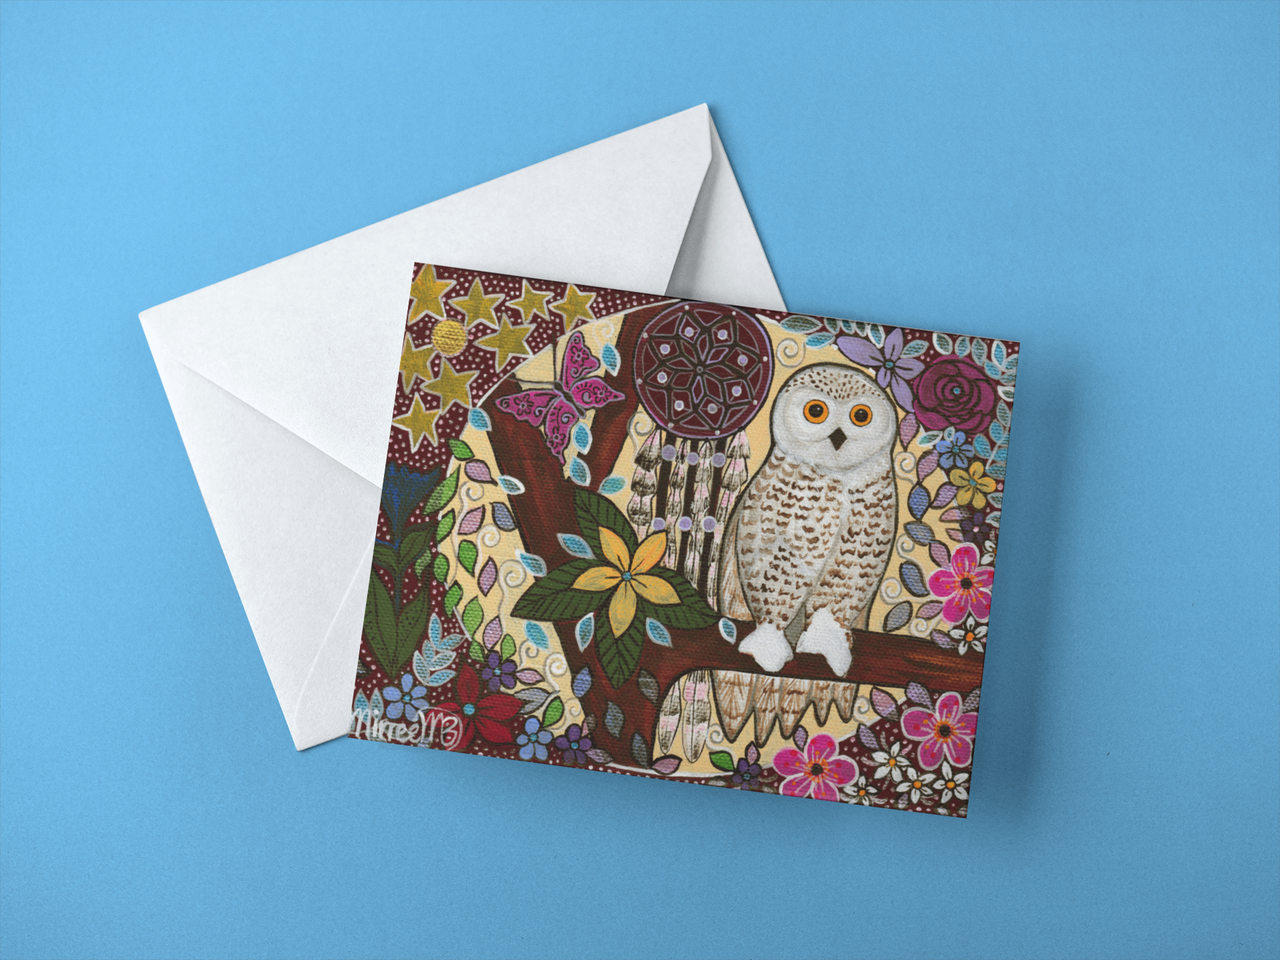 Snowy Owl Dreaming with Butterfly & flower medicine with Dreamcatcher A6 Greeting Card Single by Mirree